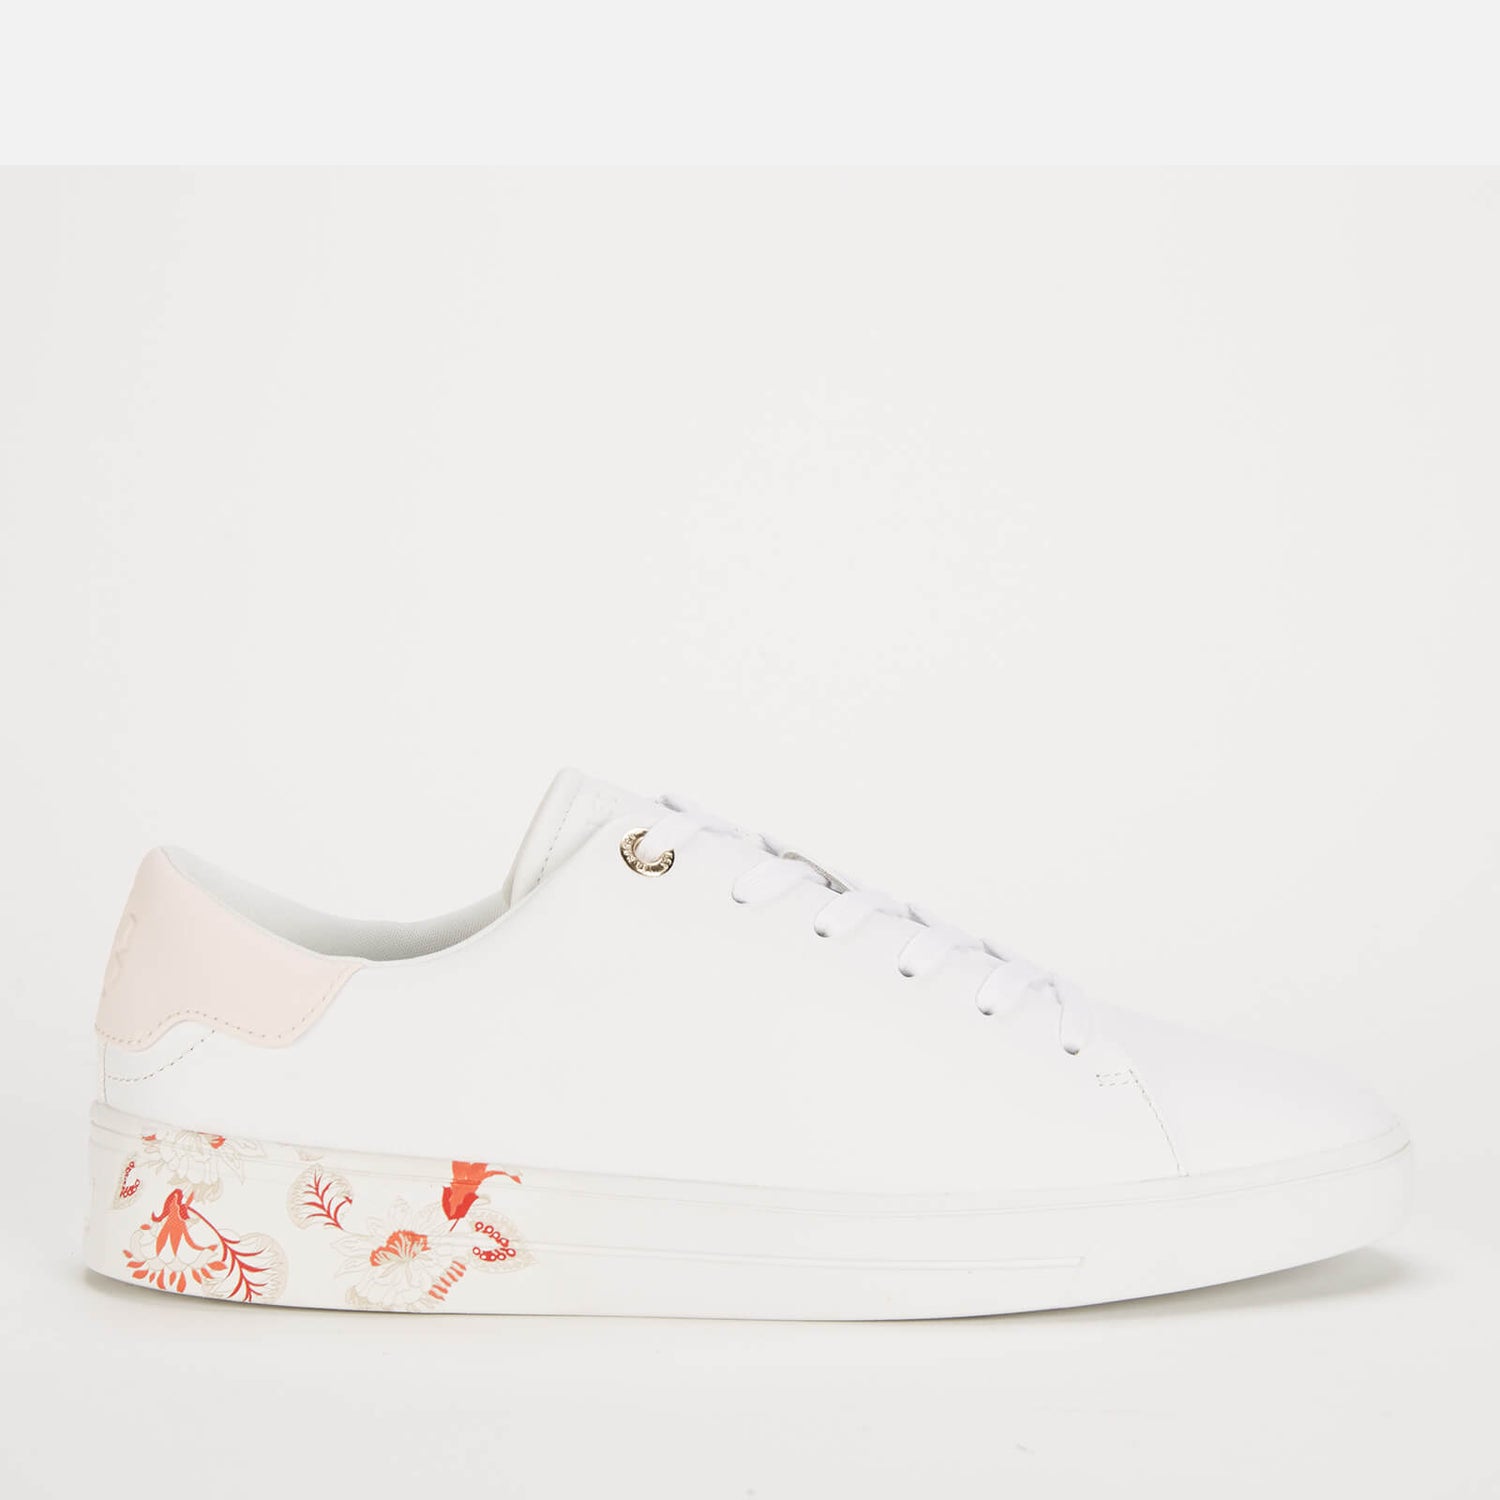 Ted Baker Women's Urbana Low Top Trainers - White - UK 7